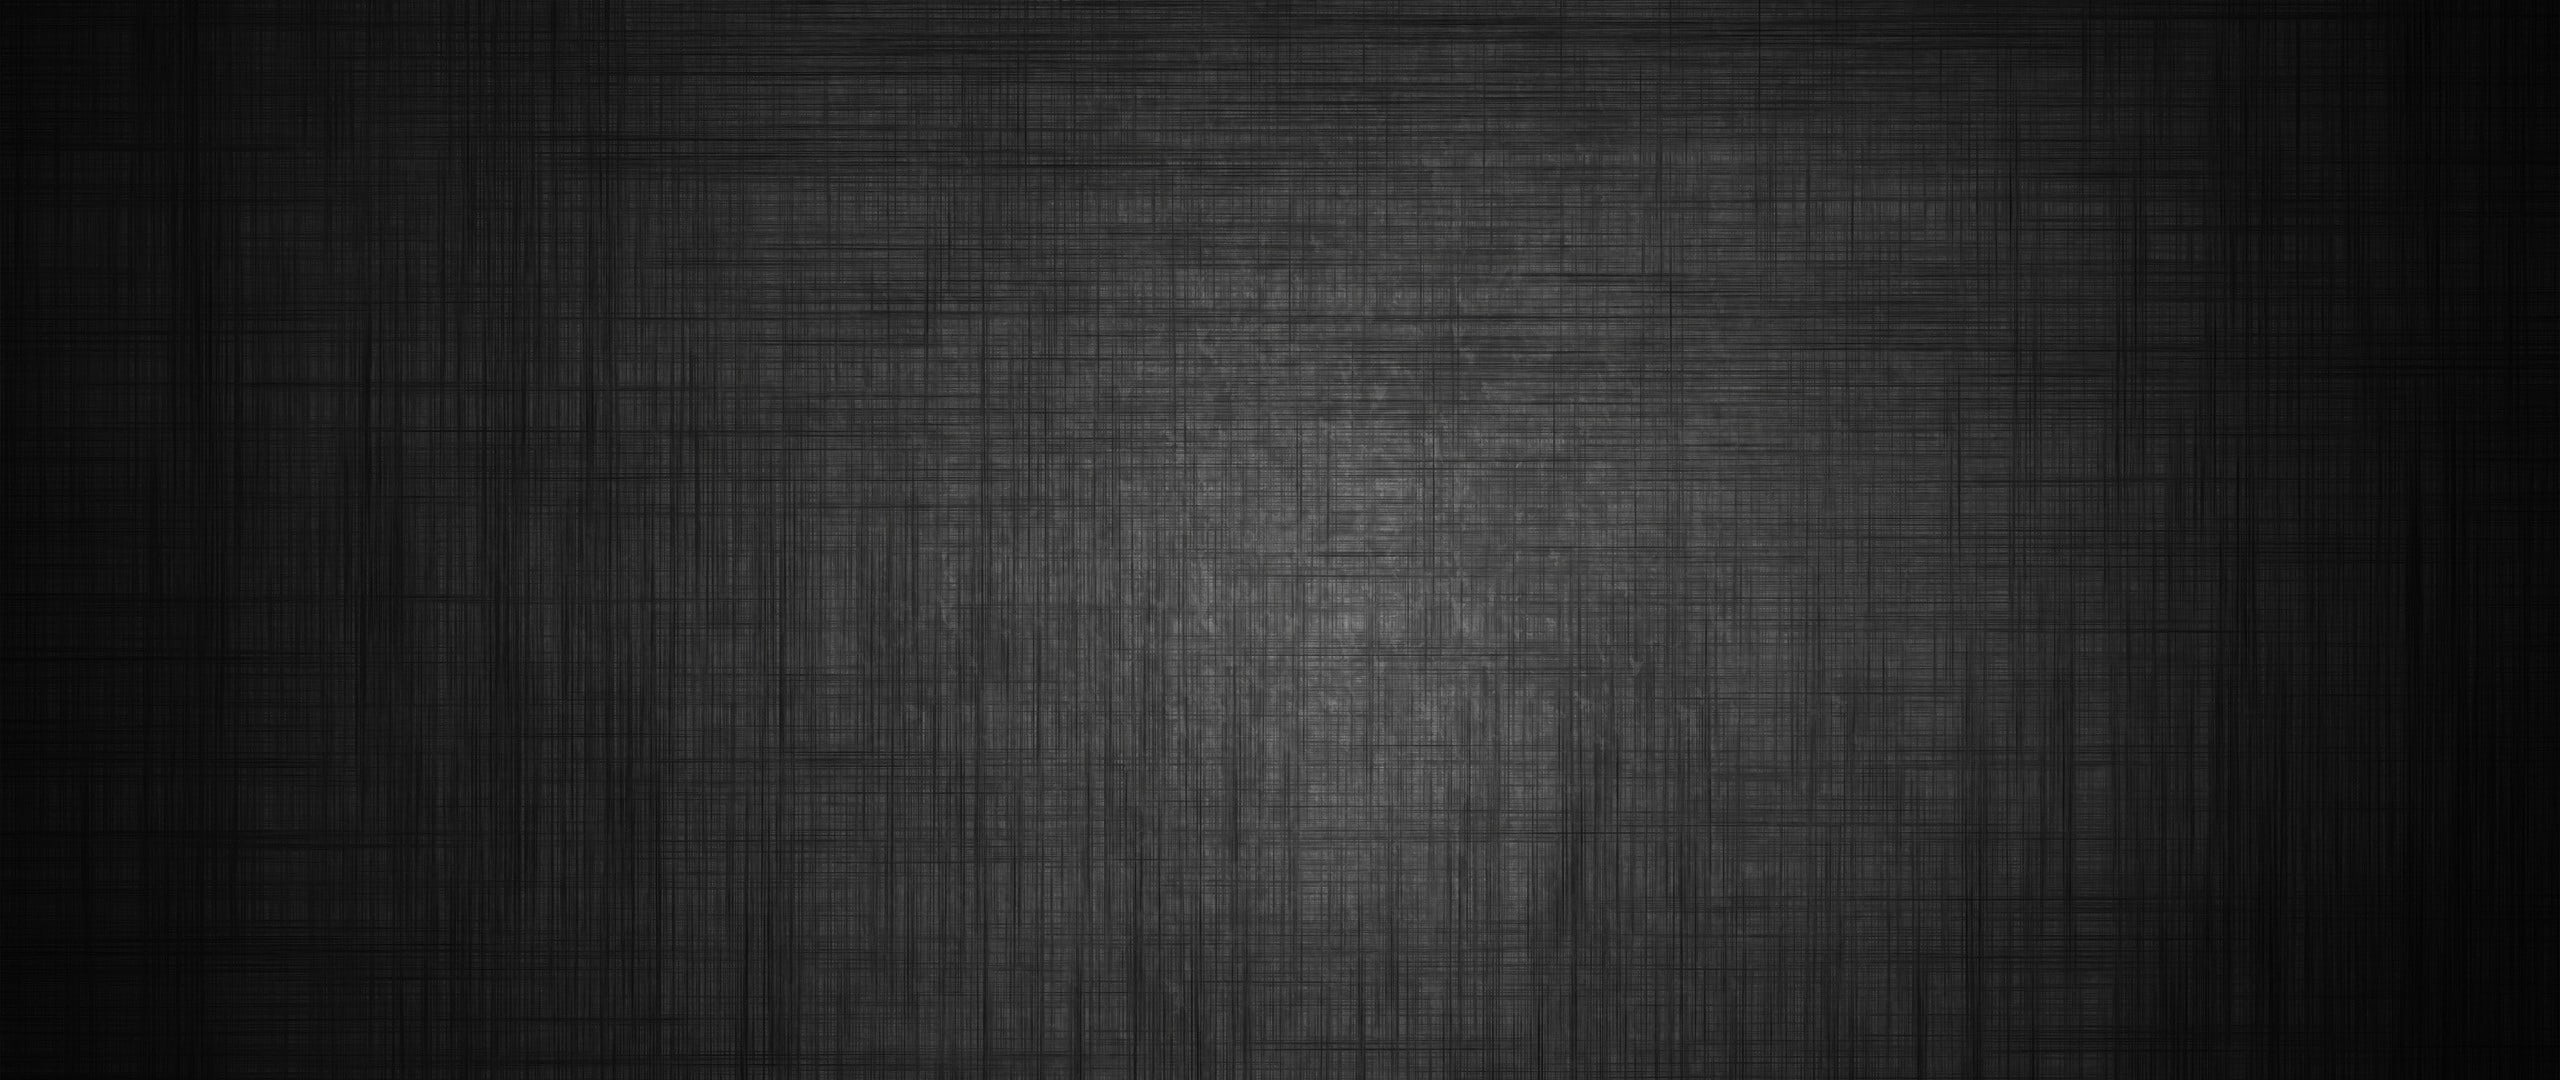 dark abstract wallpaper, texture, black color, backgrounds, textured